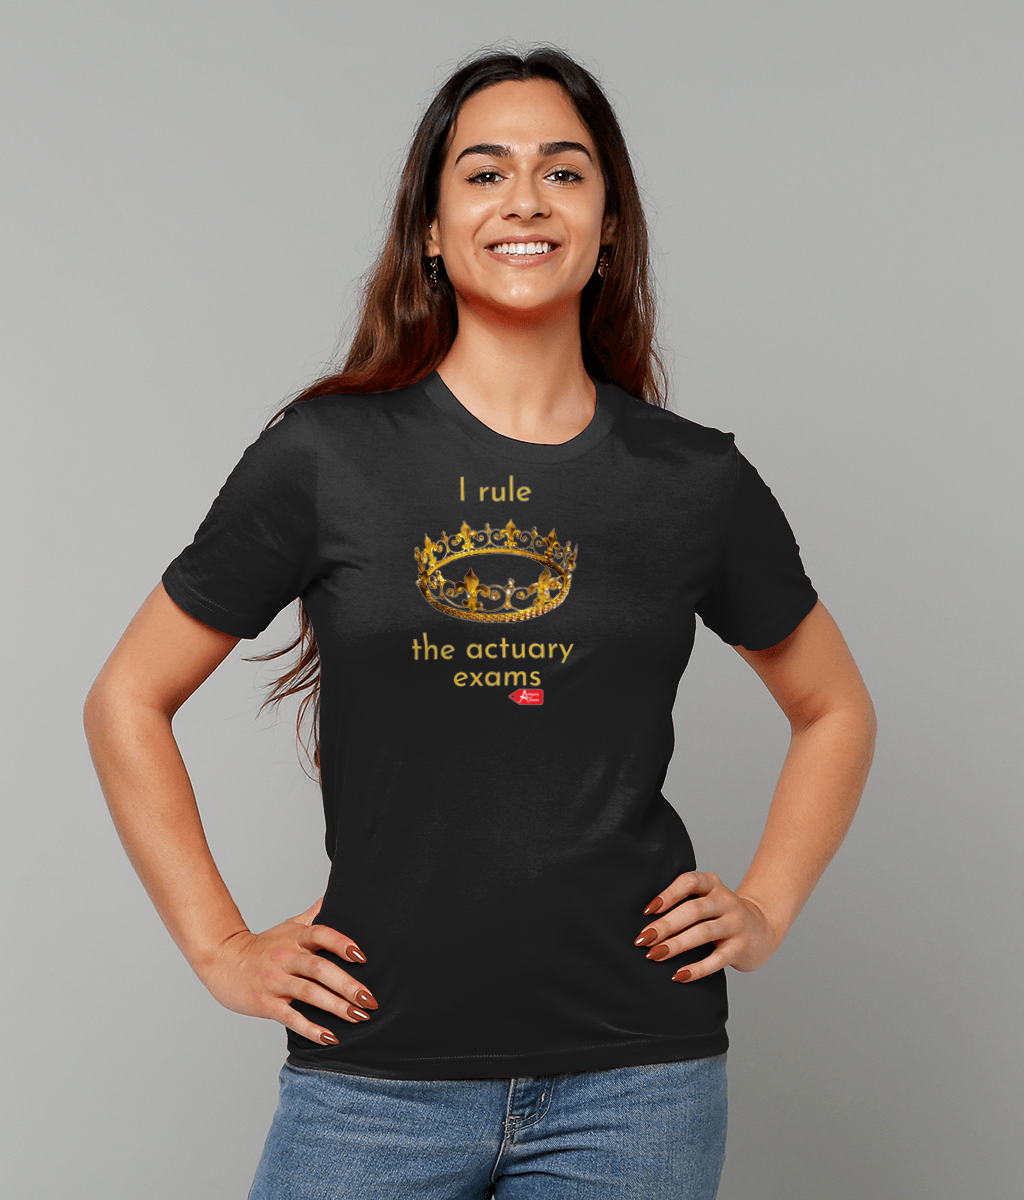 I Rule The Actuary Exams Black T-Shirt